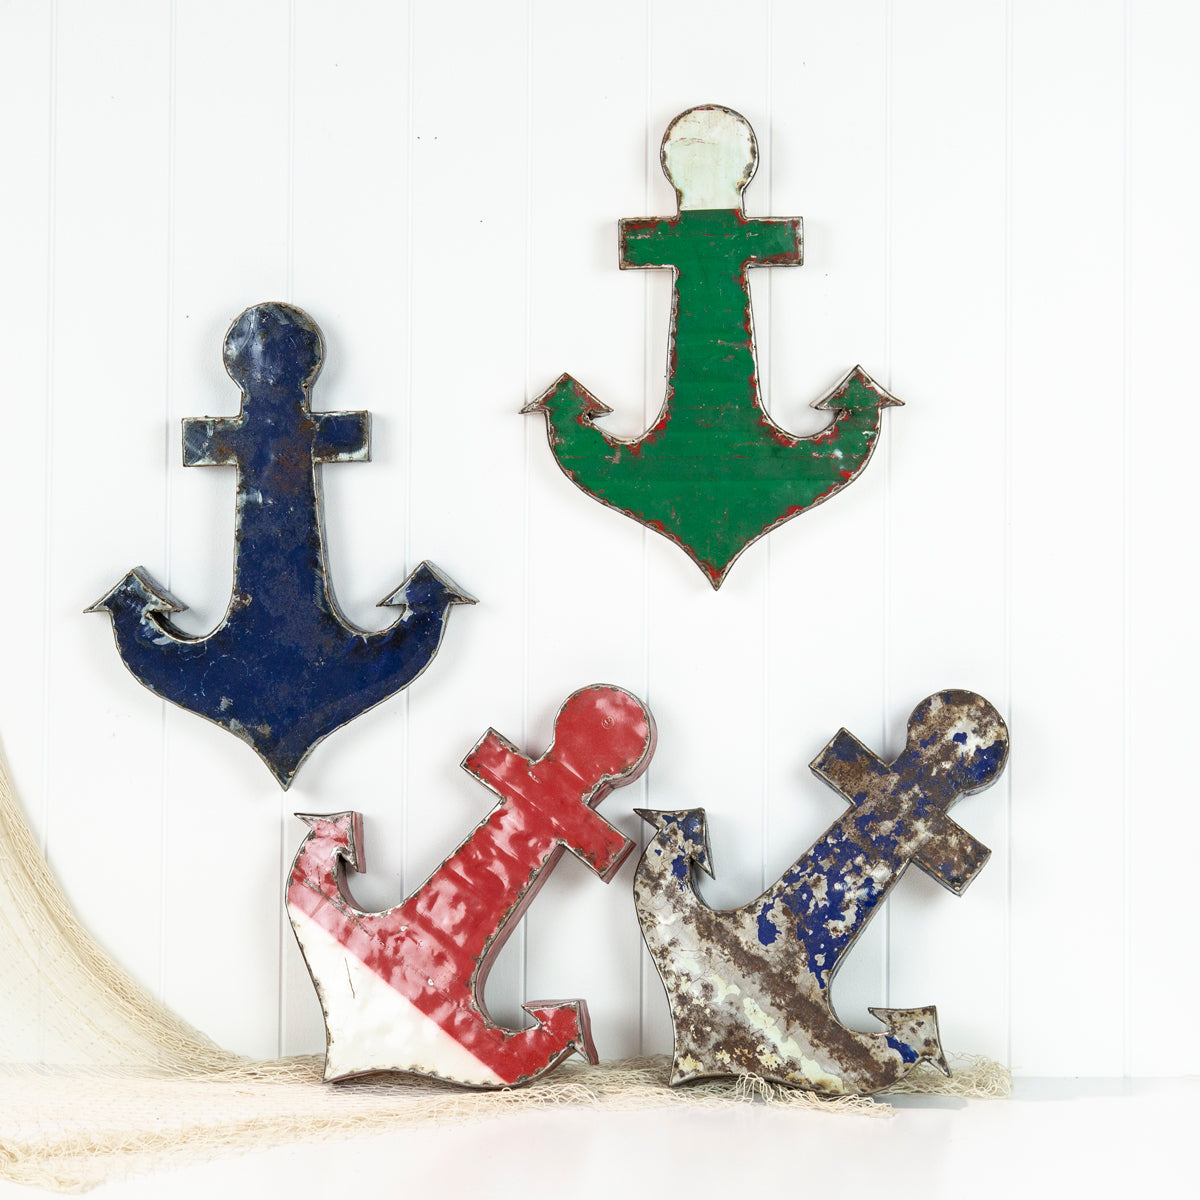 40cm Metal Anchor - Captain RED